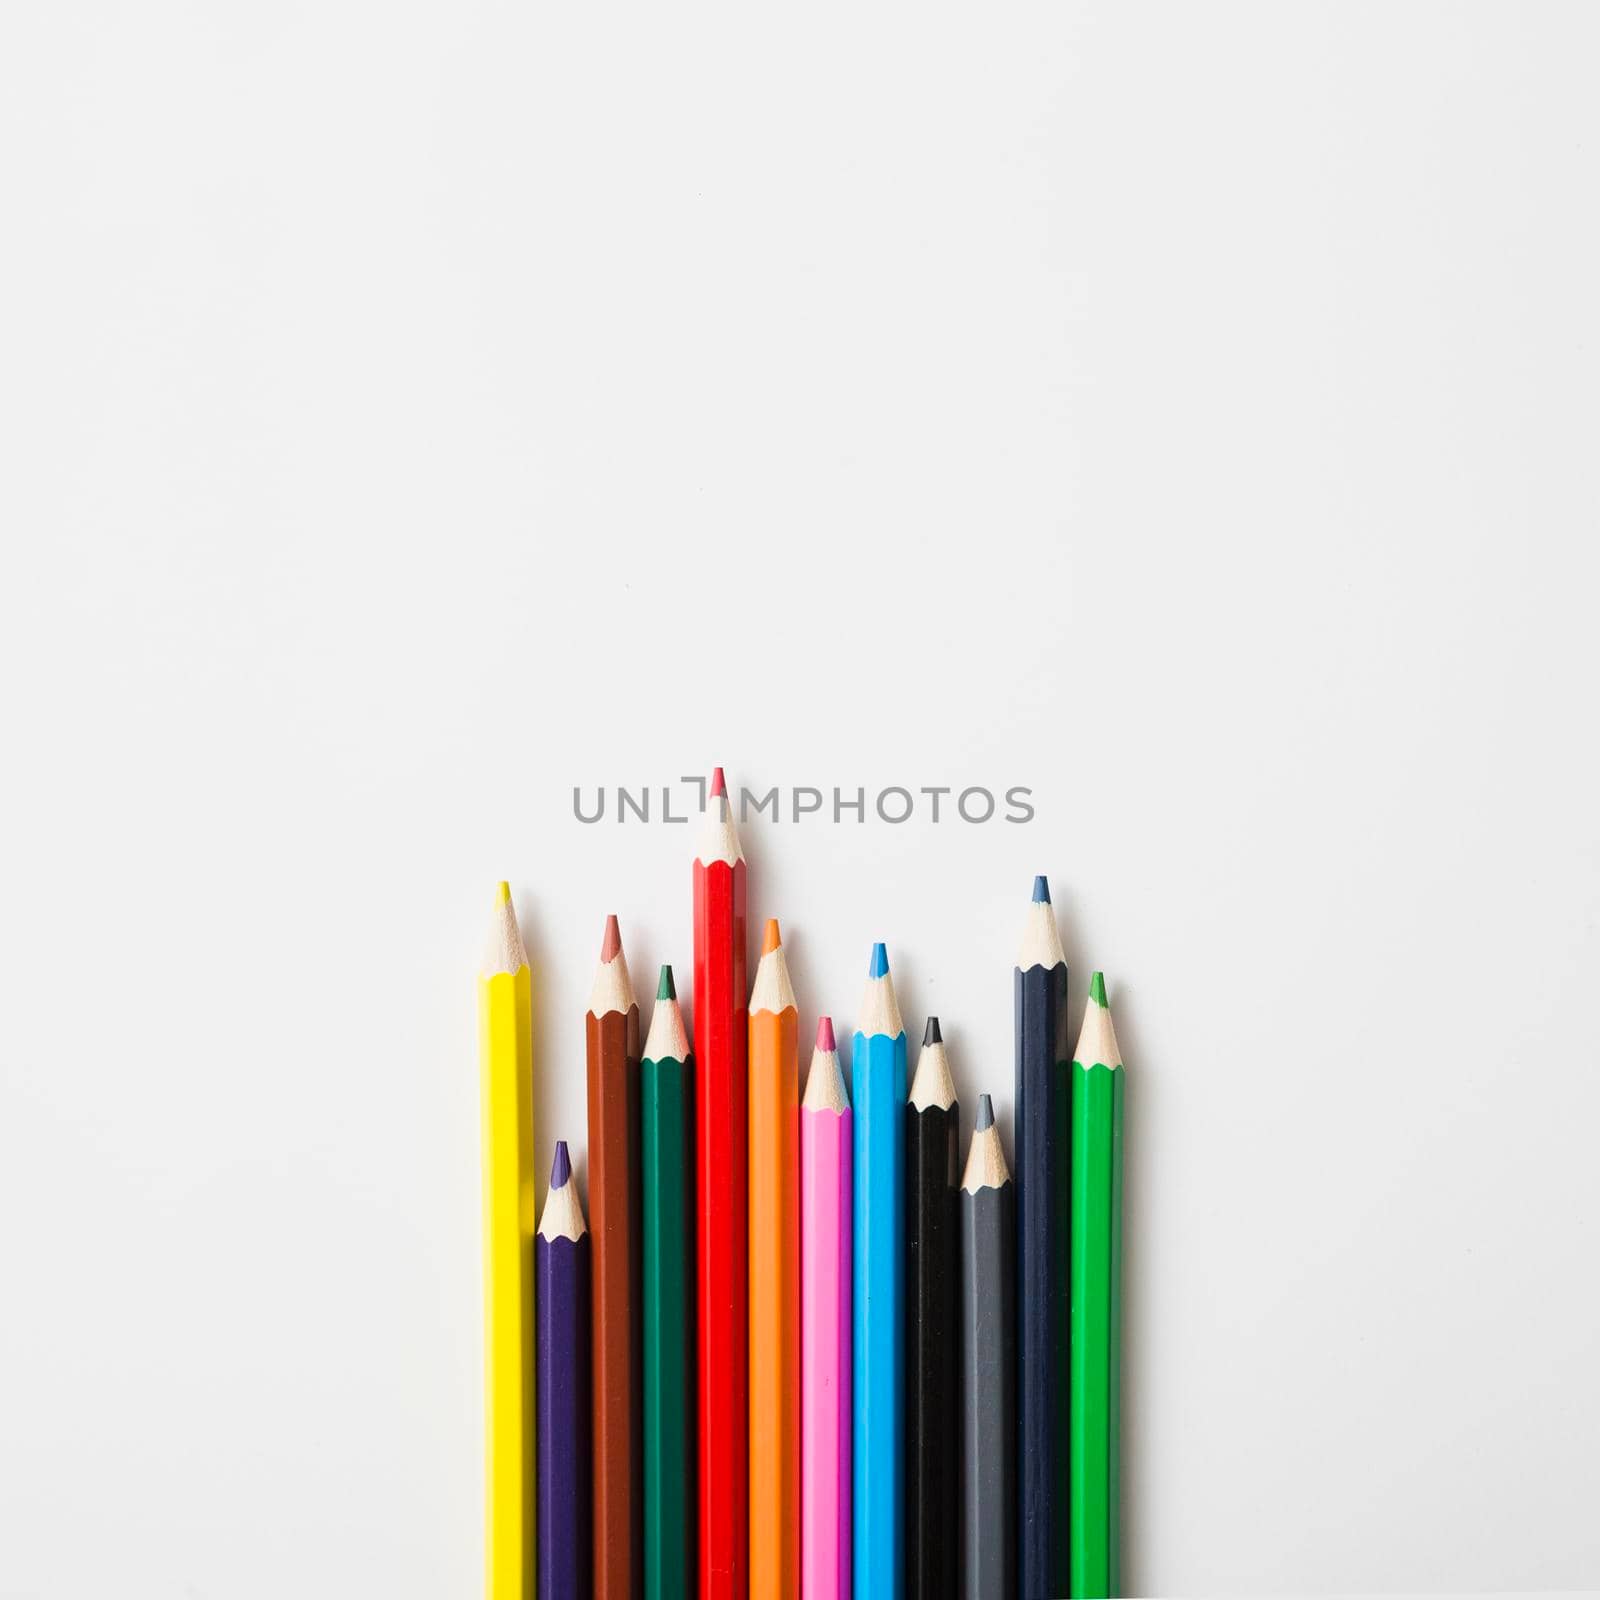 row sharp colored pencils against white background. High quality photo by Zahard